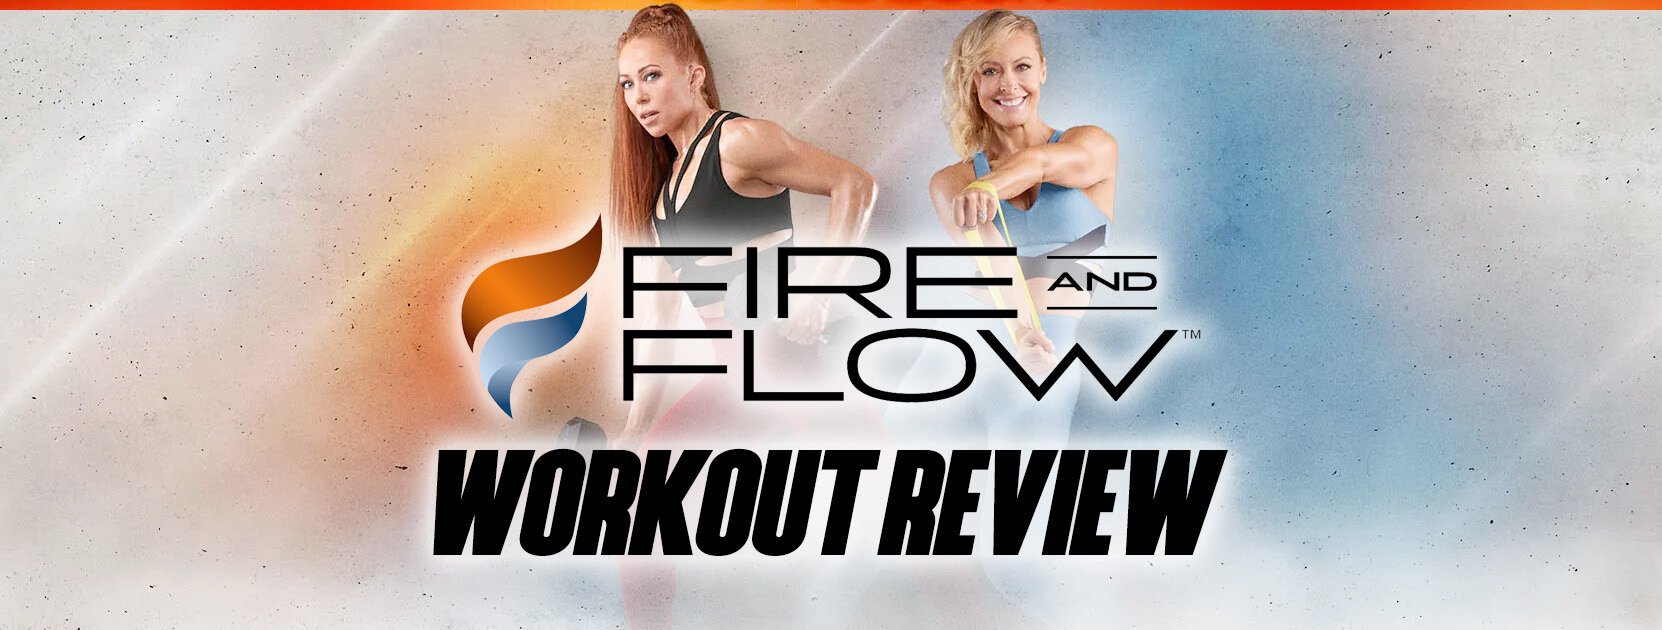 Fire and Flow Workout Review